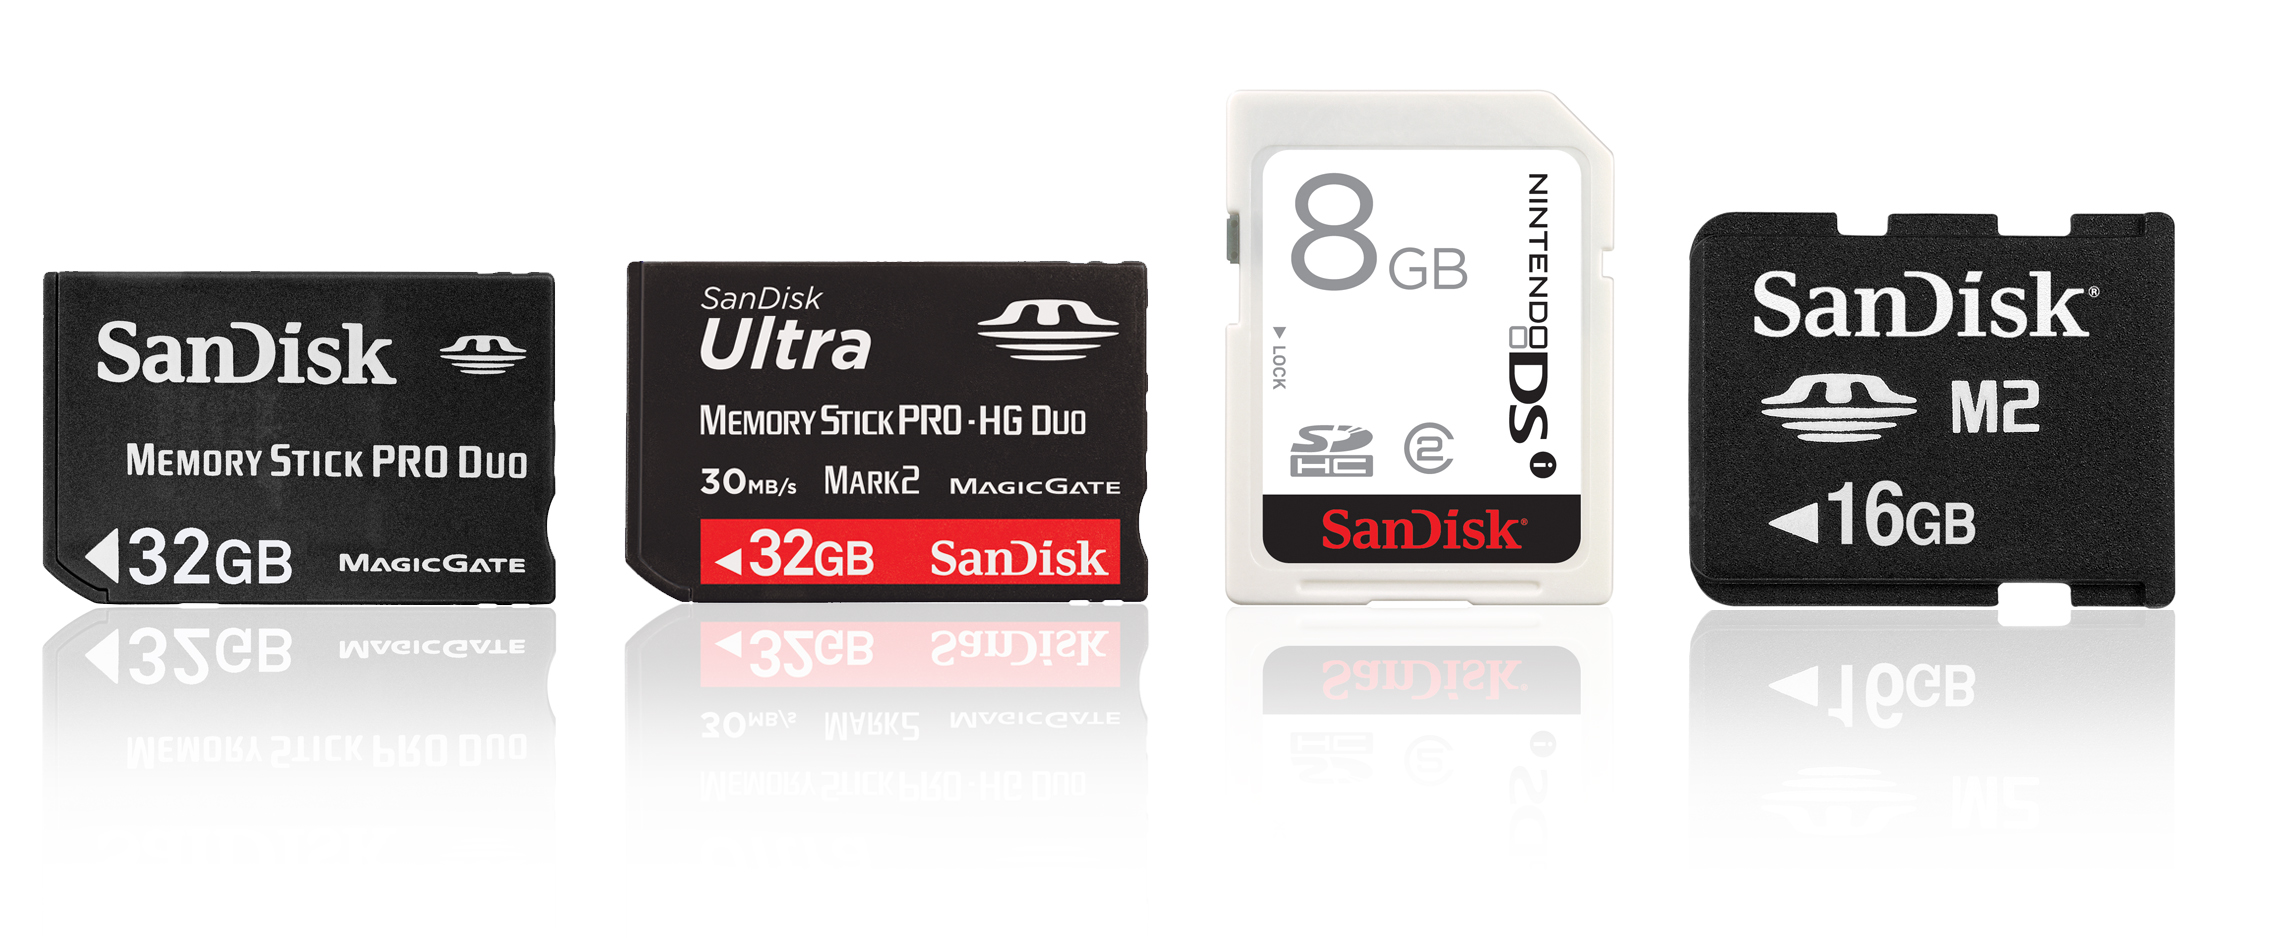 Være Luscious squat SanDisk announces new 16GB memory card in time for Sony PSP Go release |  ZDNET